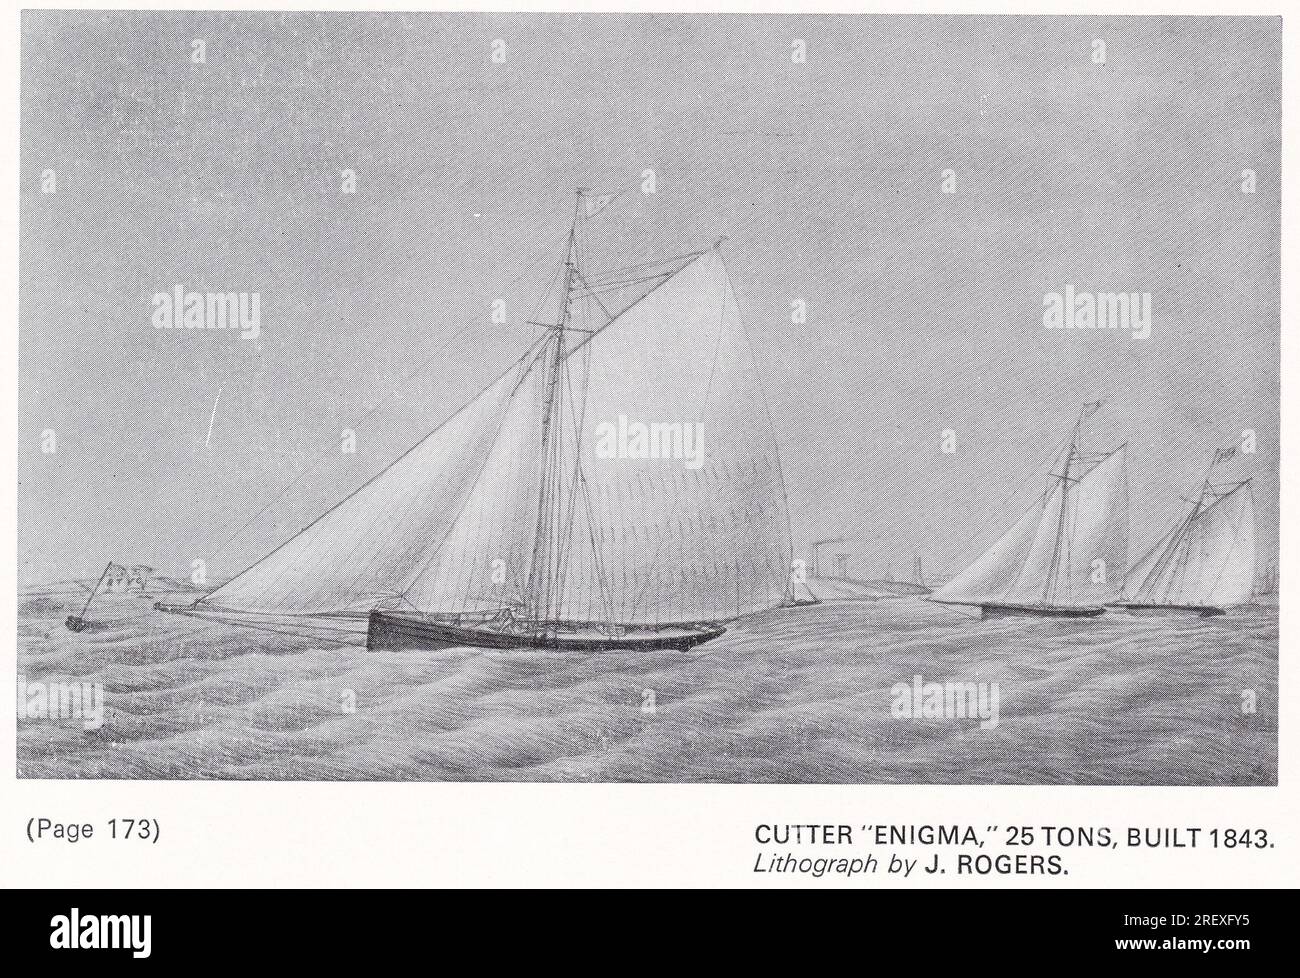 Cutter 'Enigma', 25 Tons, Built 1843. Stock Photo